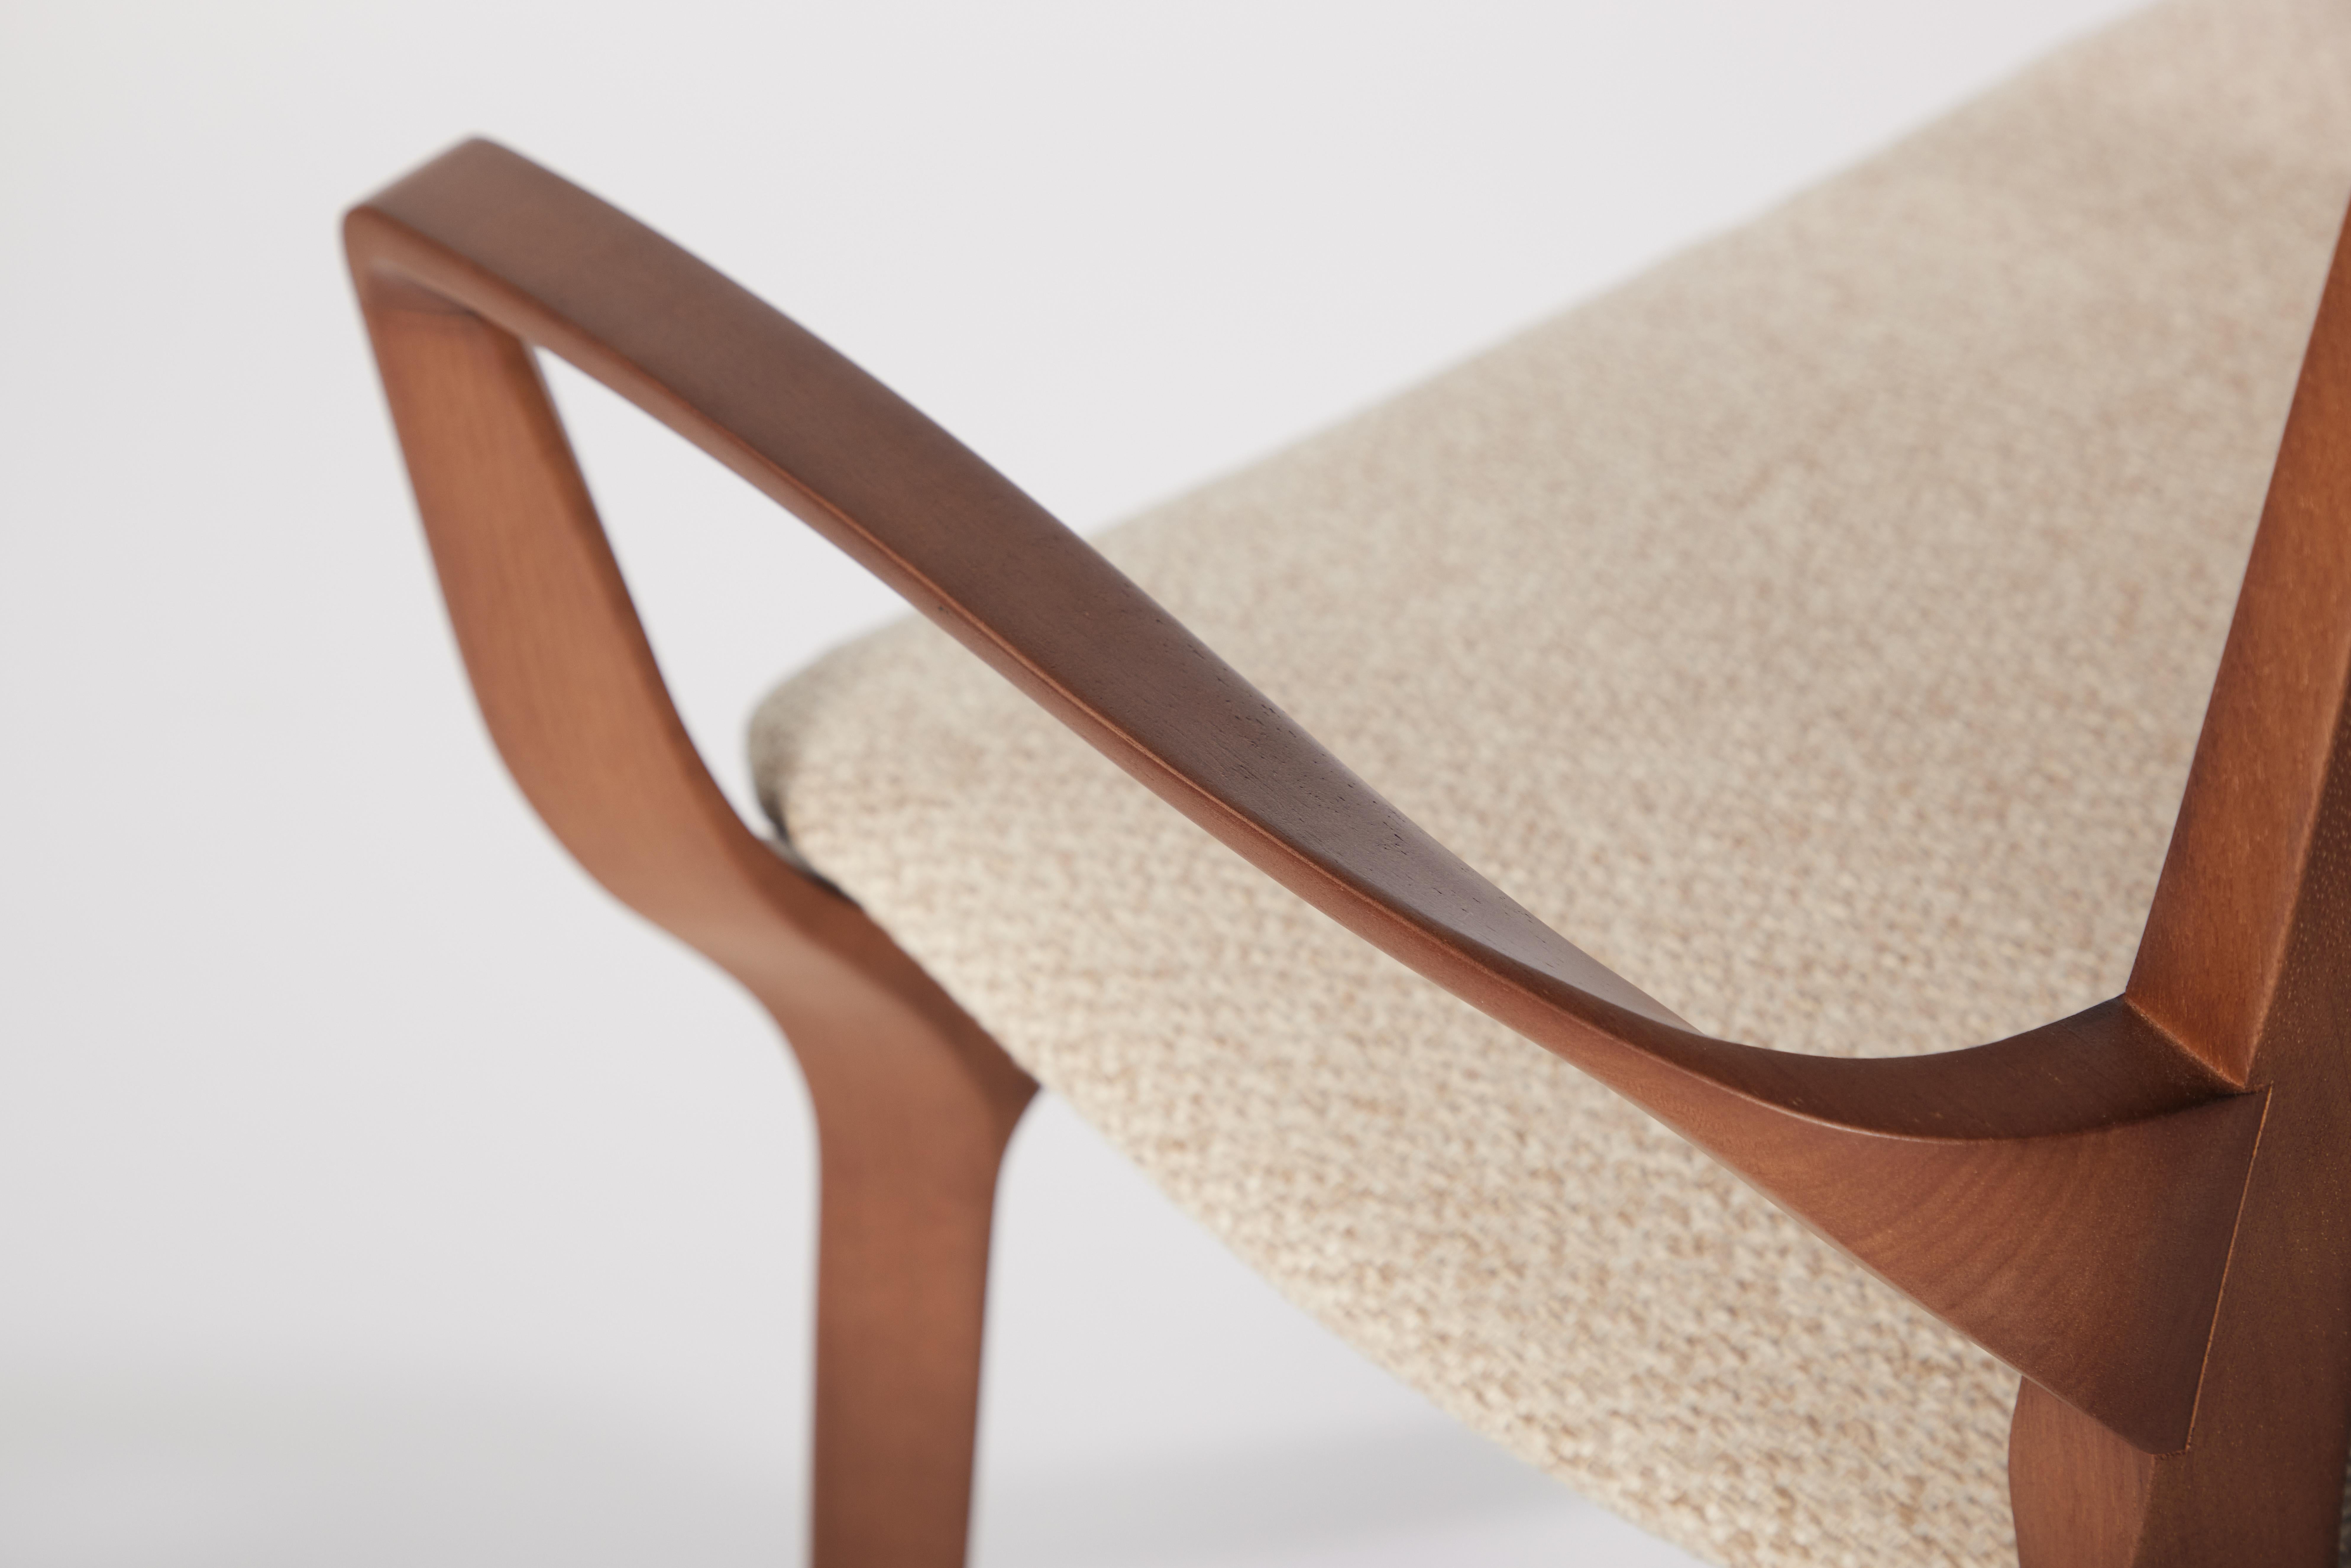 The Moderns Aurora Chair Sculptured in Walnut Finish Arms, leather seating, cane en vente 1